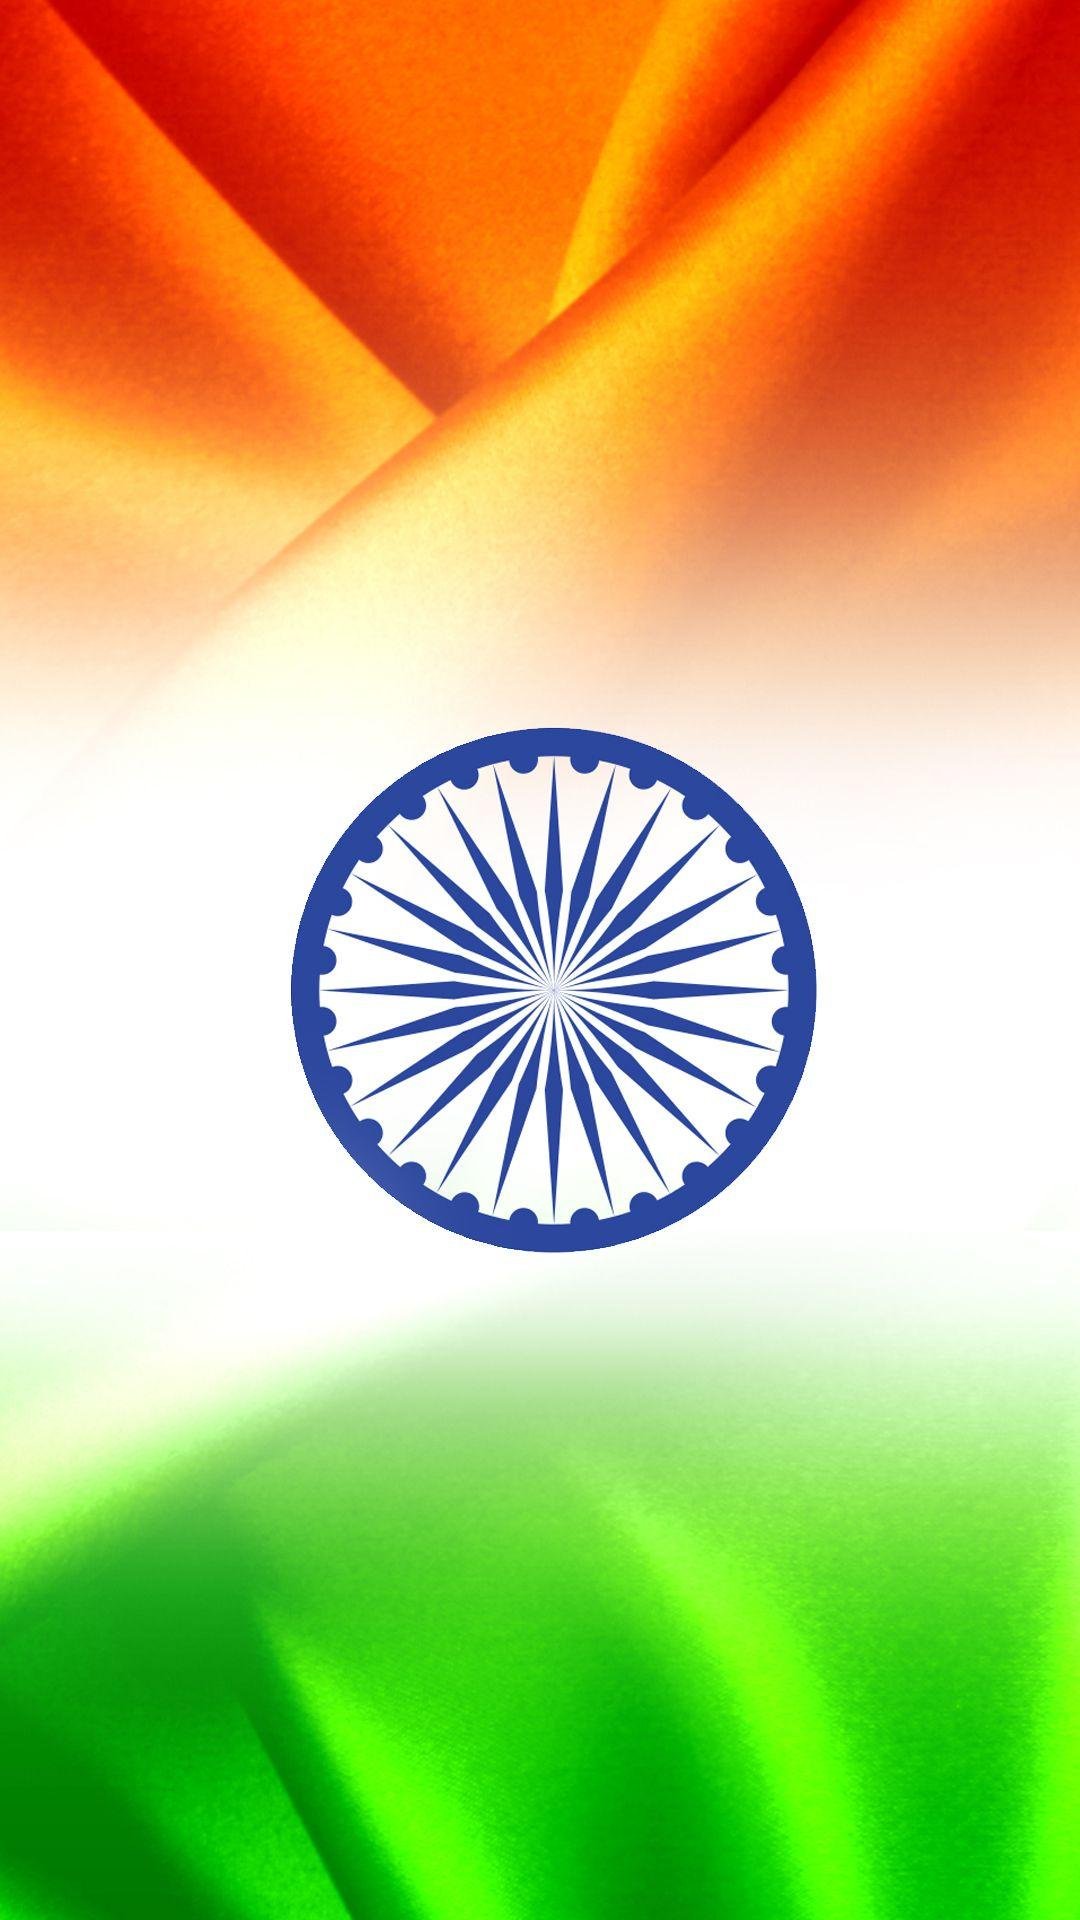 11500 Indian Flag Stock Photos Pictures  RoyaltyFree Images  iStock  Indian  flag mask Indian flag color vector Native american indian flag